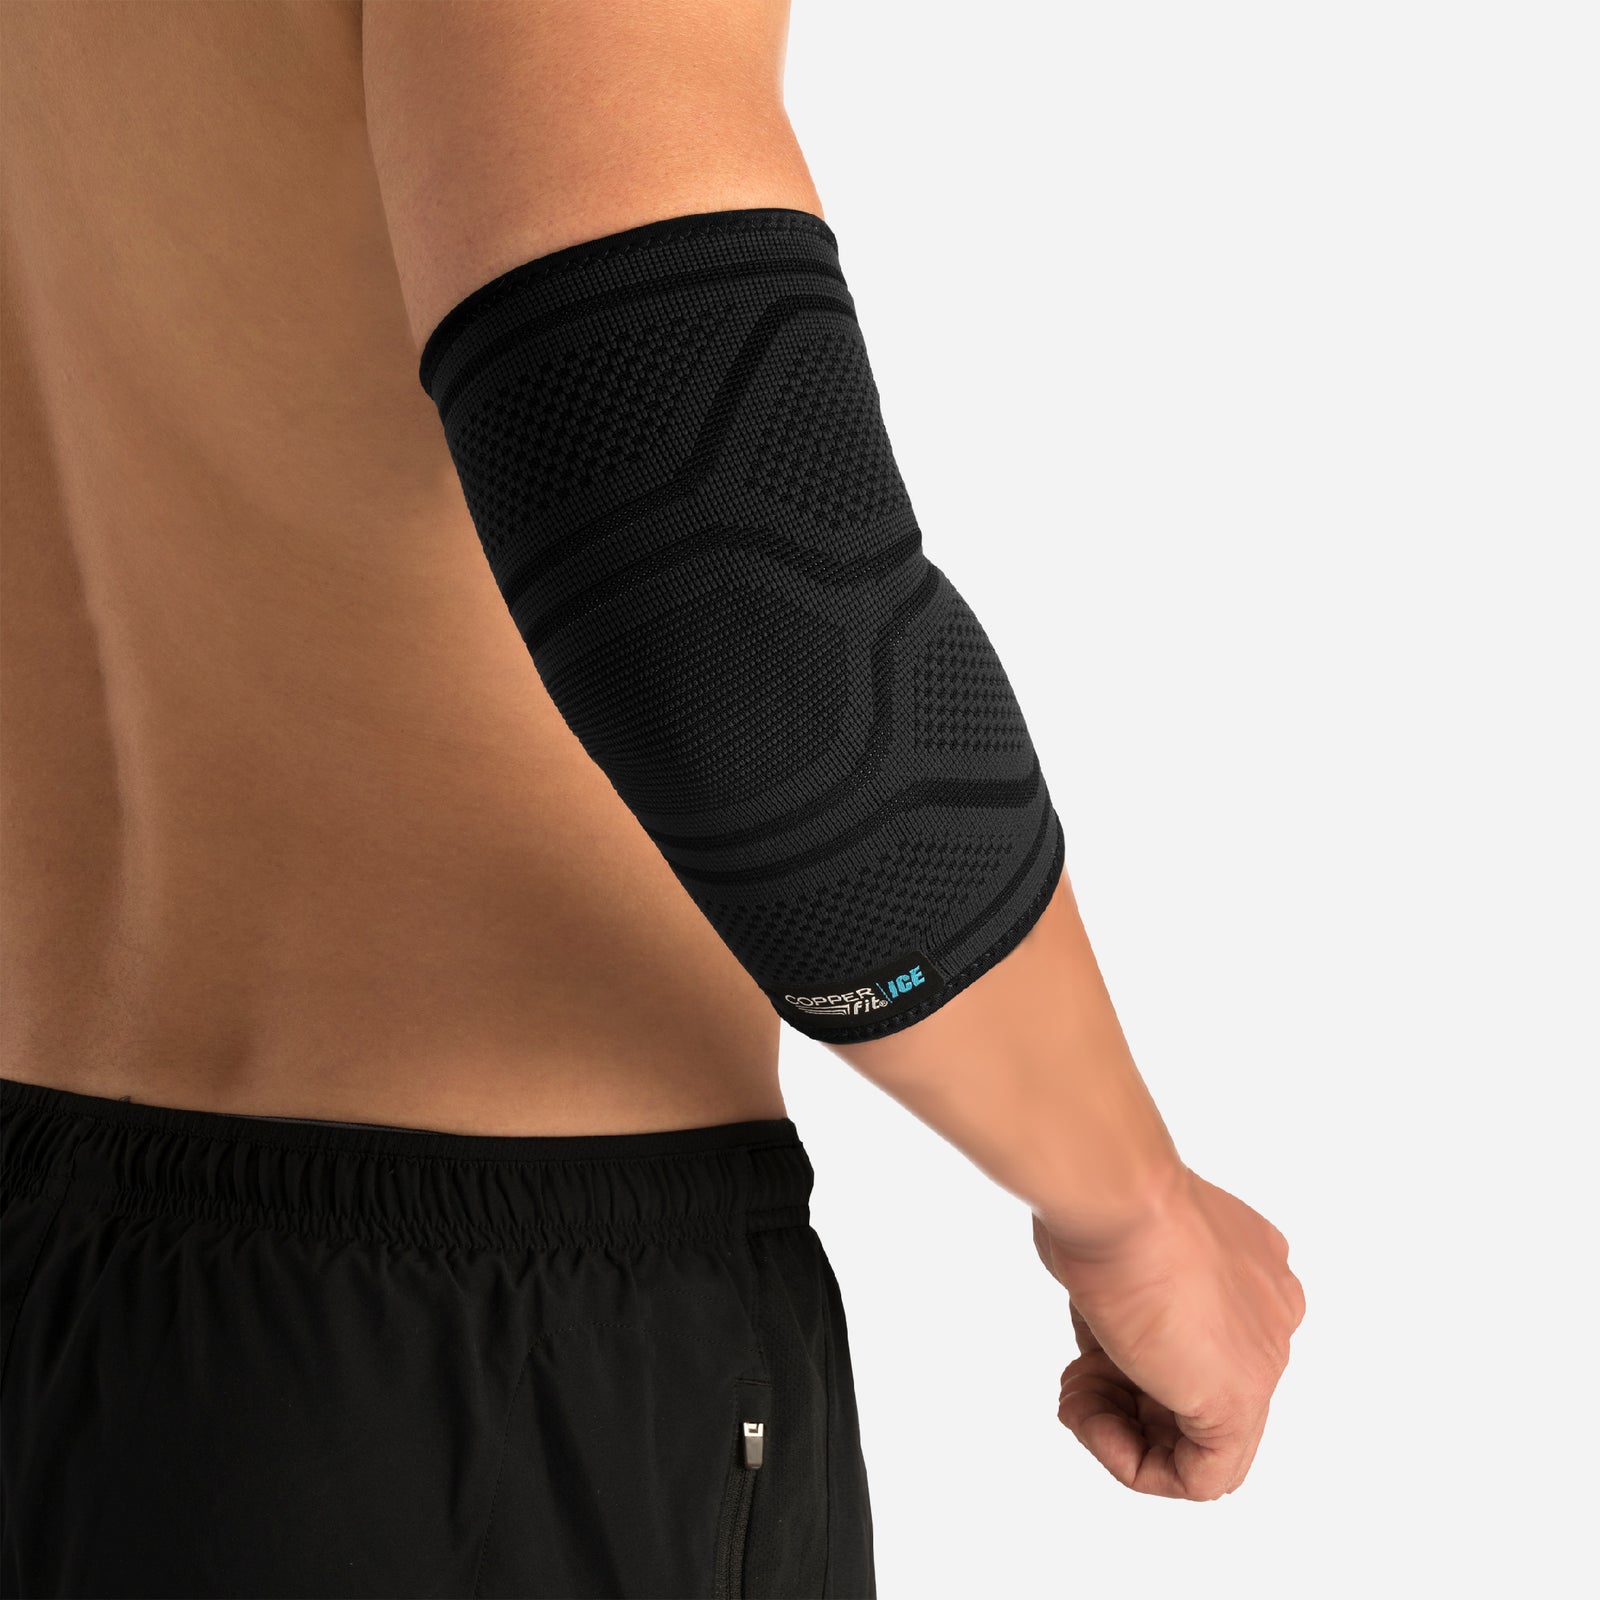 Copper Fit ICE Knee Sleeve Infused with Cooling Action & Menthol - Miazone